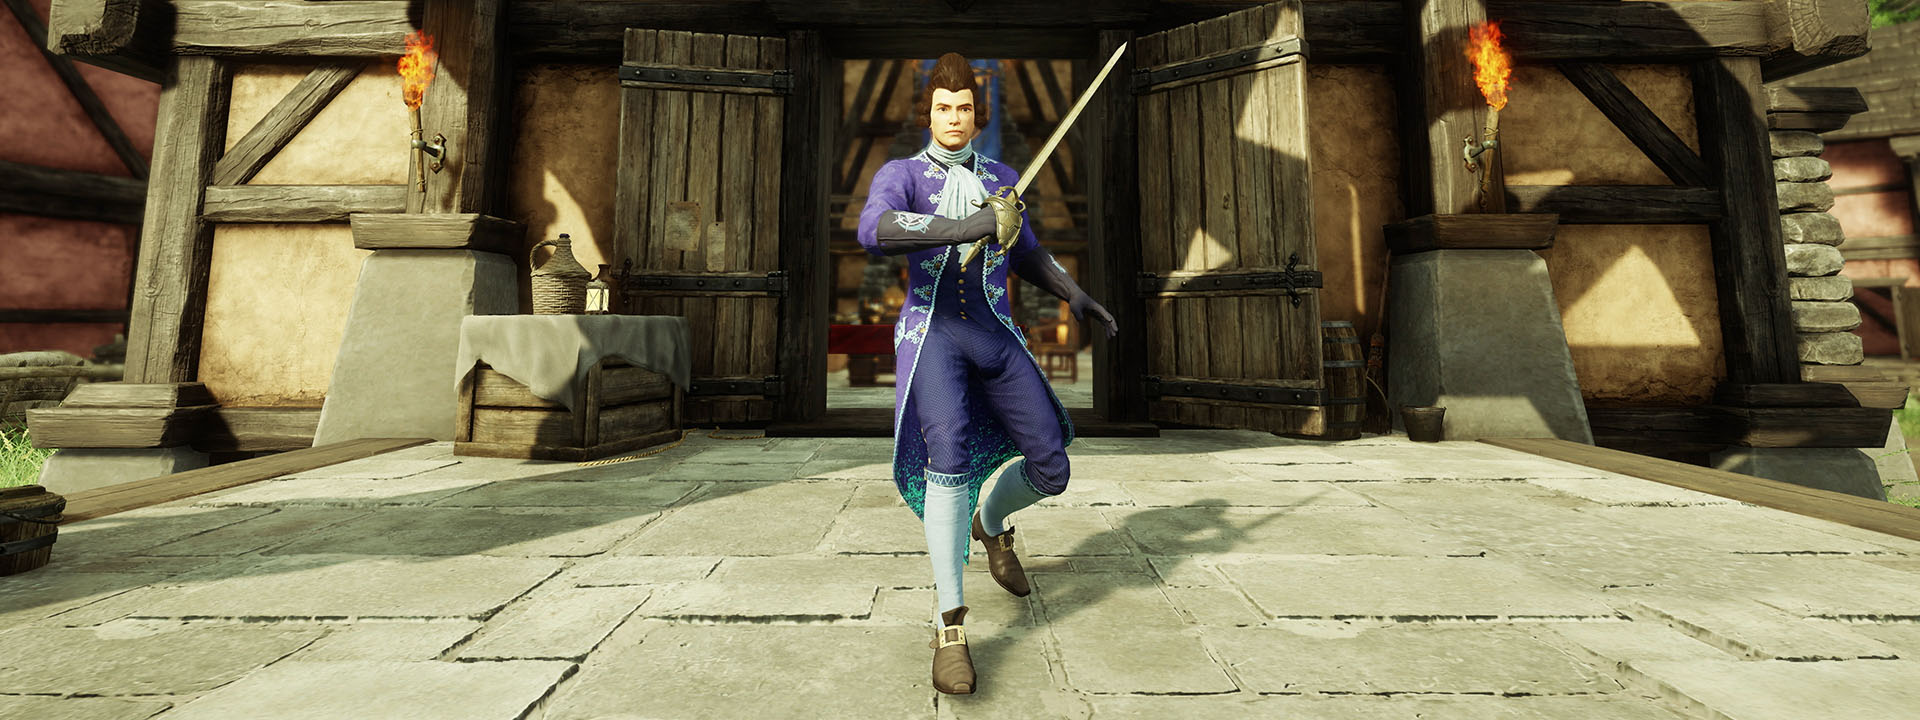 A screenshot of a man in fancy purple Regency-era clothes walking out of a building and holding his rapier up as if en garde.